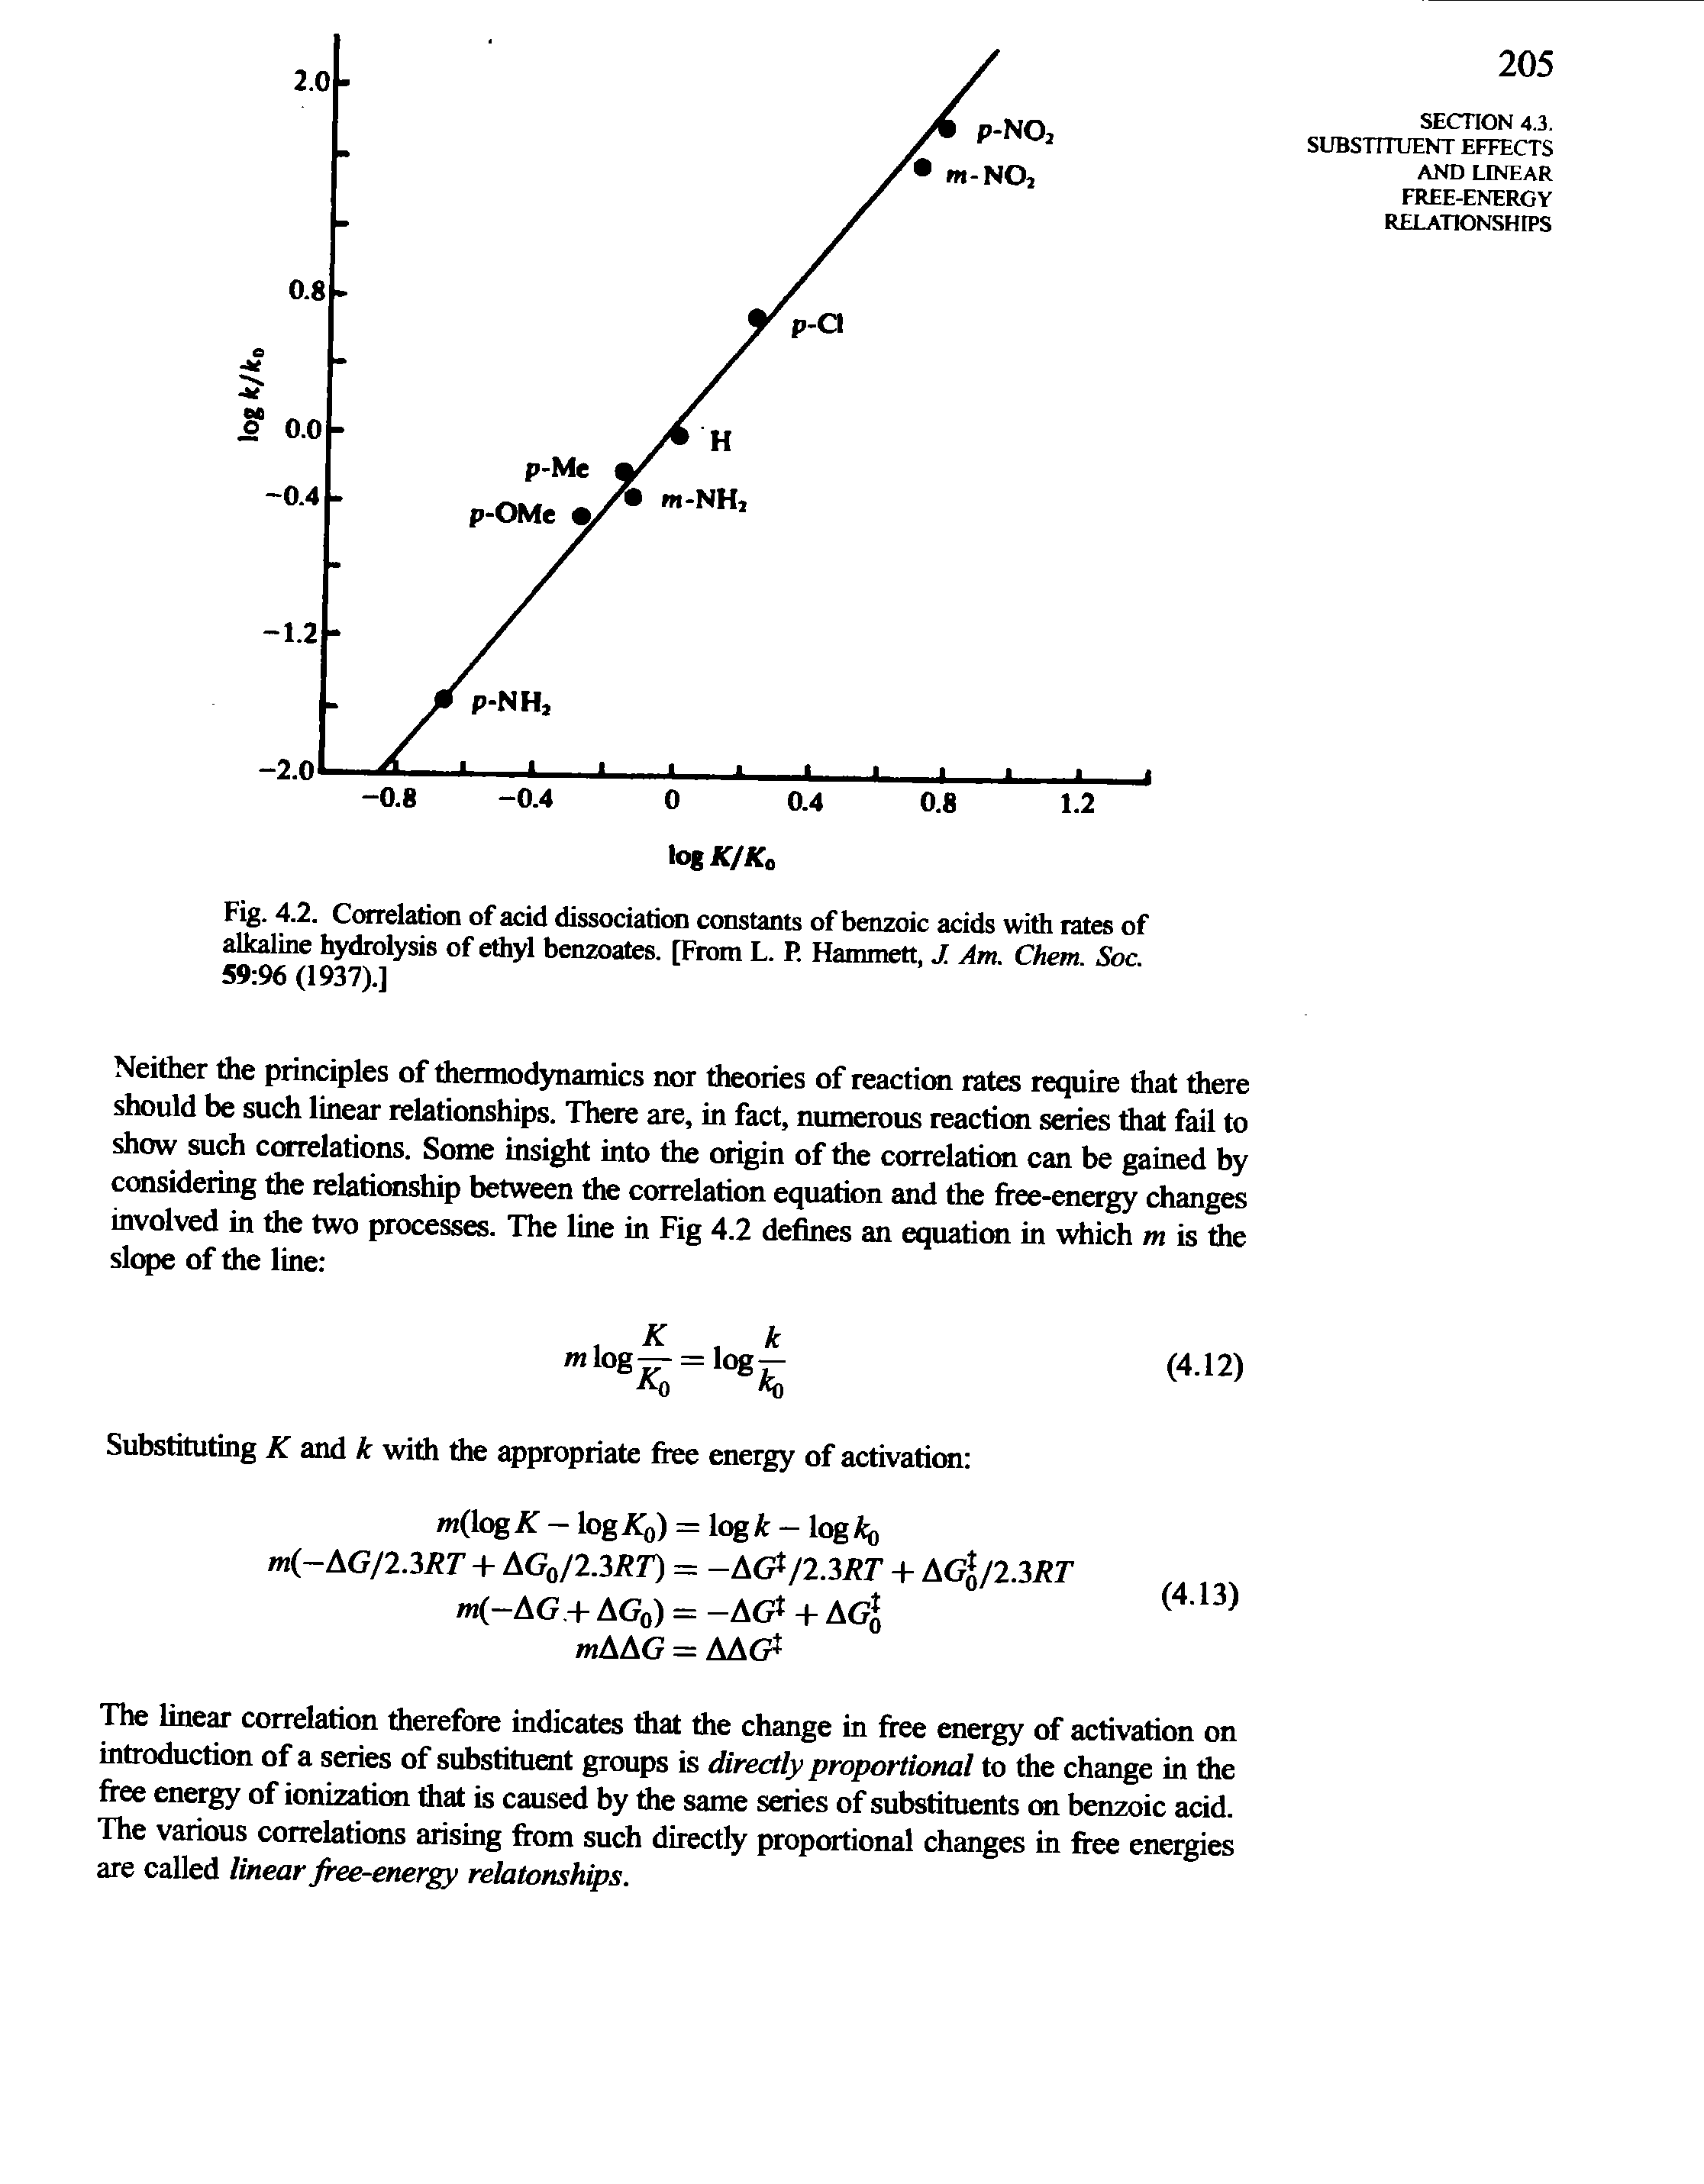 Fig. 4.2. Conelation of acid dissociation constants of benzoic acids with rates of alkaline hydrolysis of ethyl benzoates. [From L. P. Hammett, J. Am. Chem. Soc. 59 96 (1937).]...